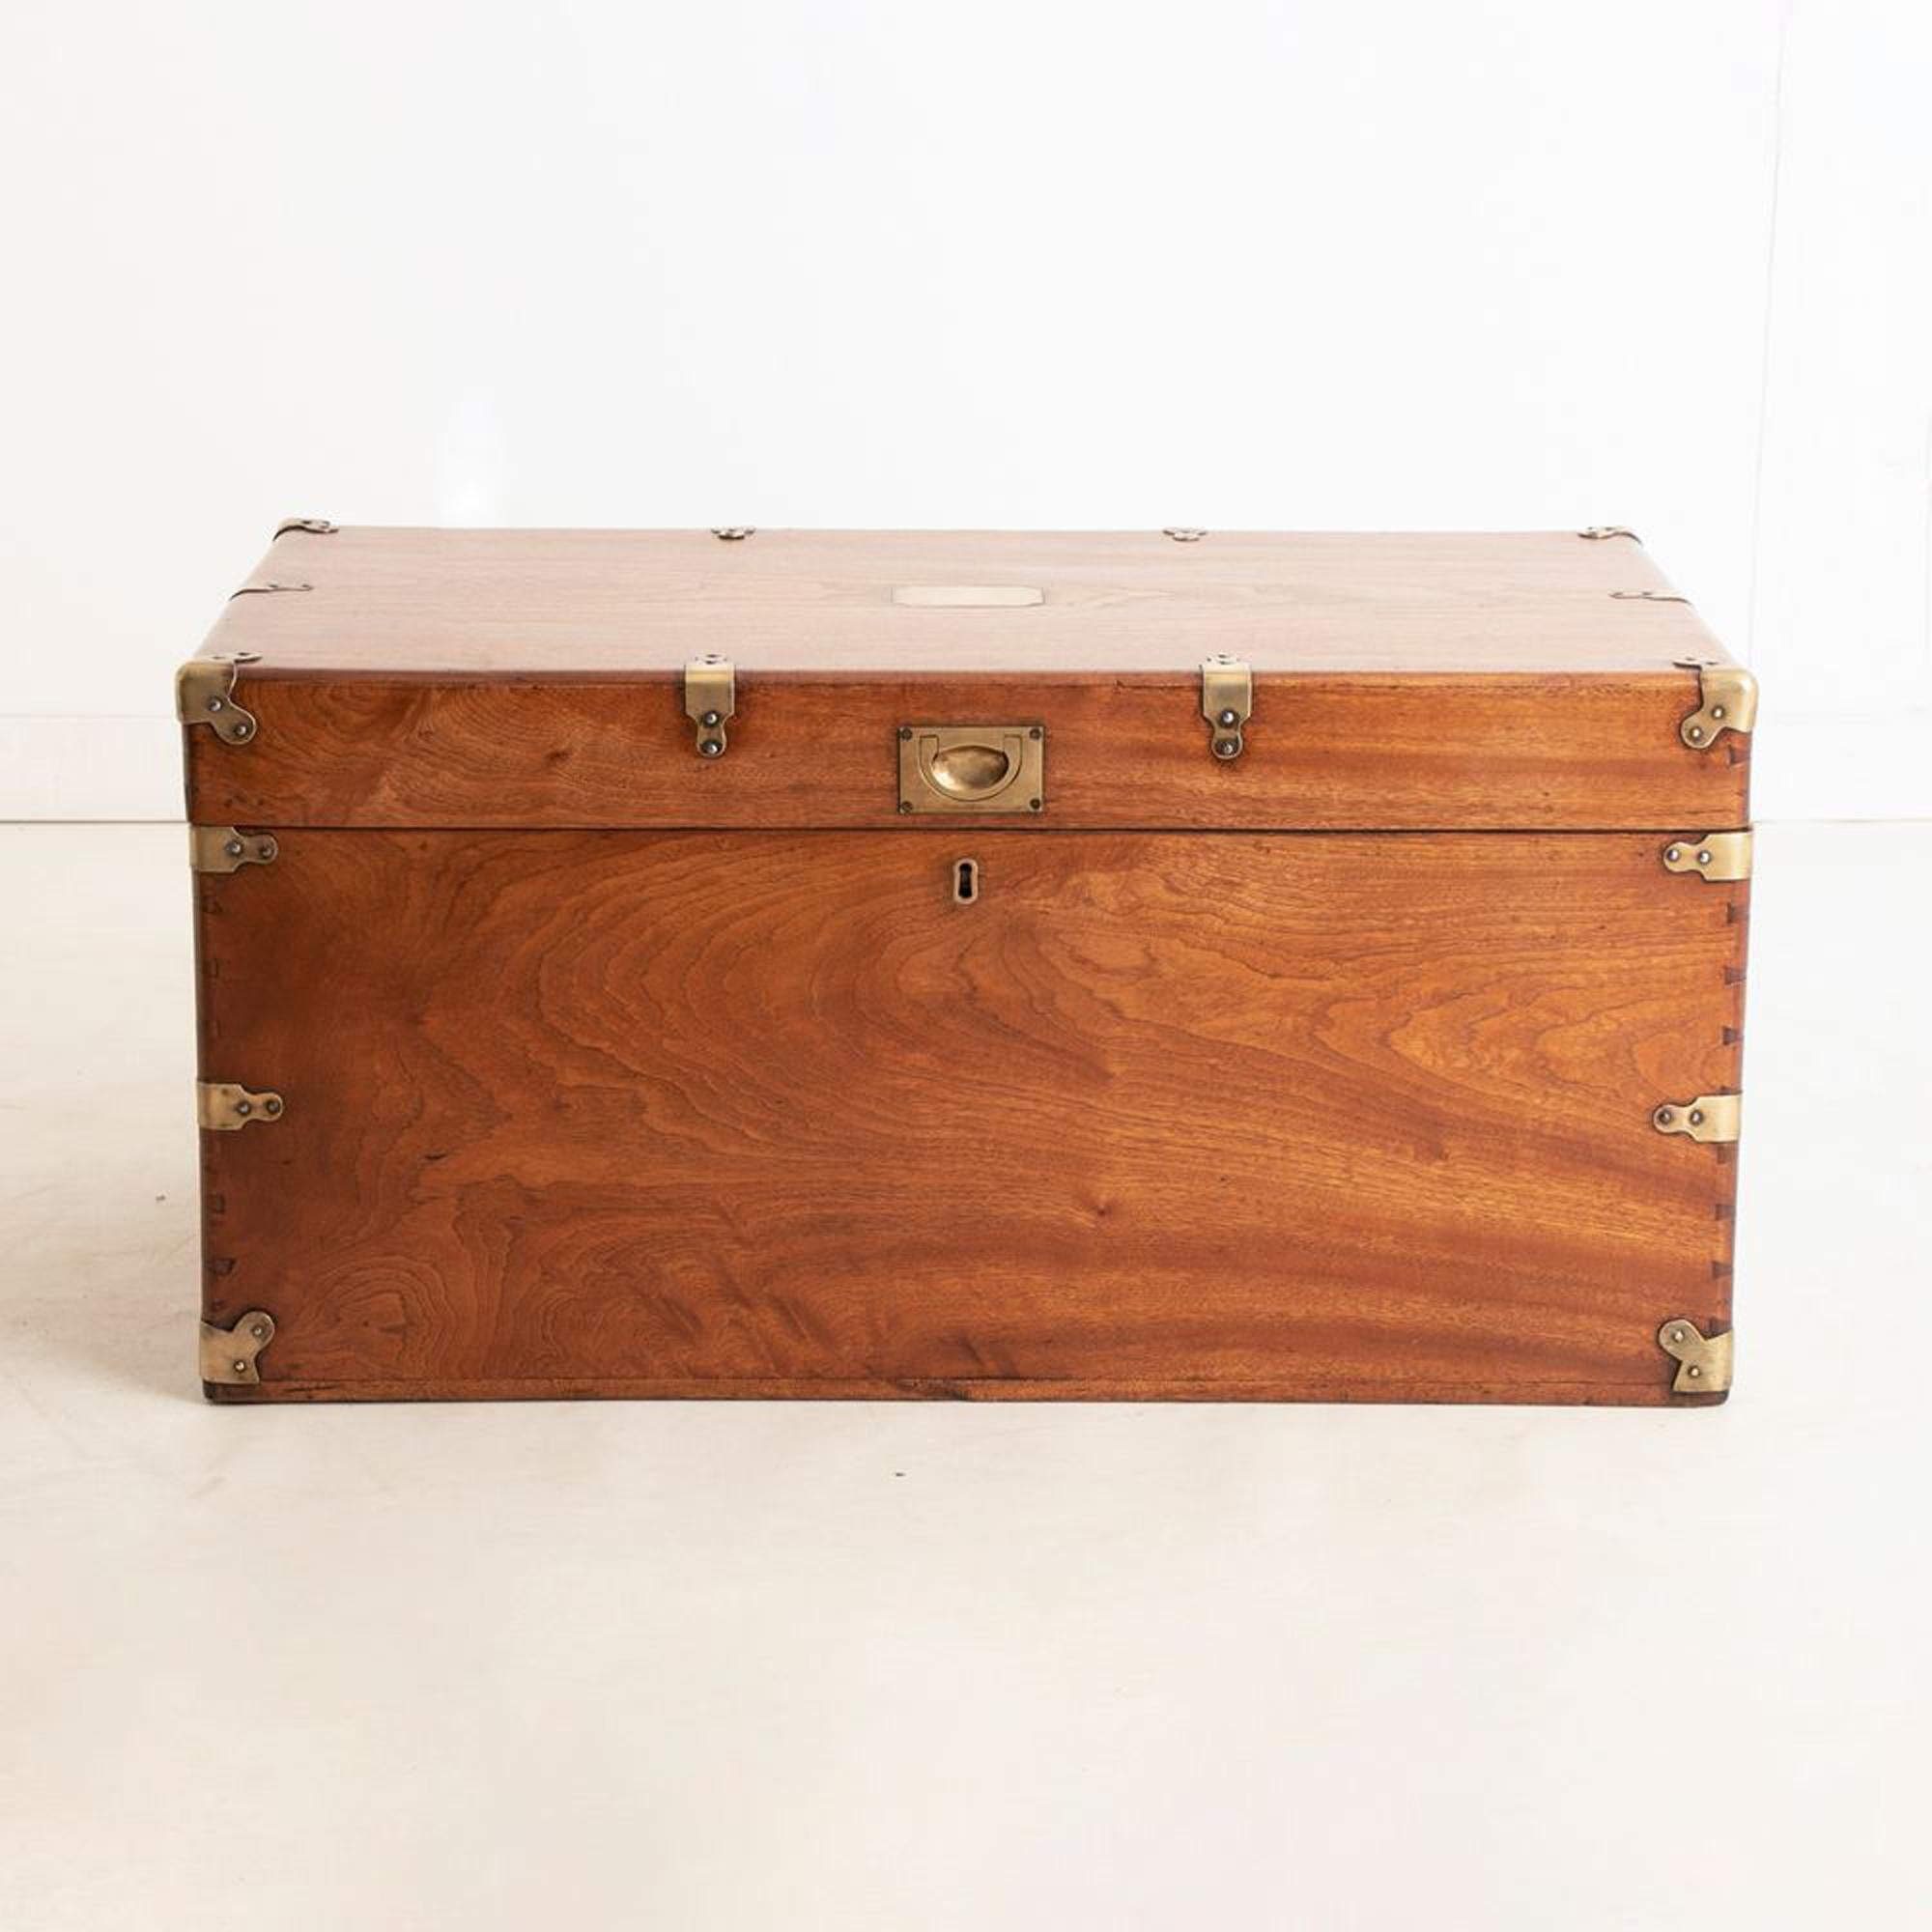 An antique military trunk made in camphorwood with brass hardware.

Professionally restored and bespoke polished with an original very clean interior and a wonderful camphor scent.